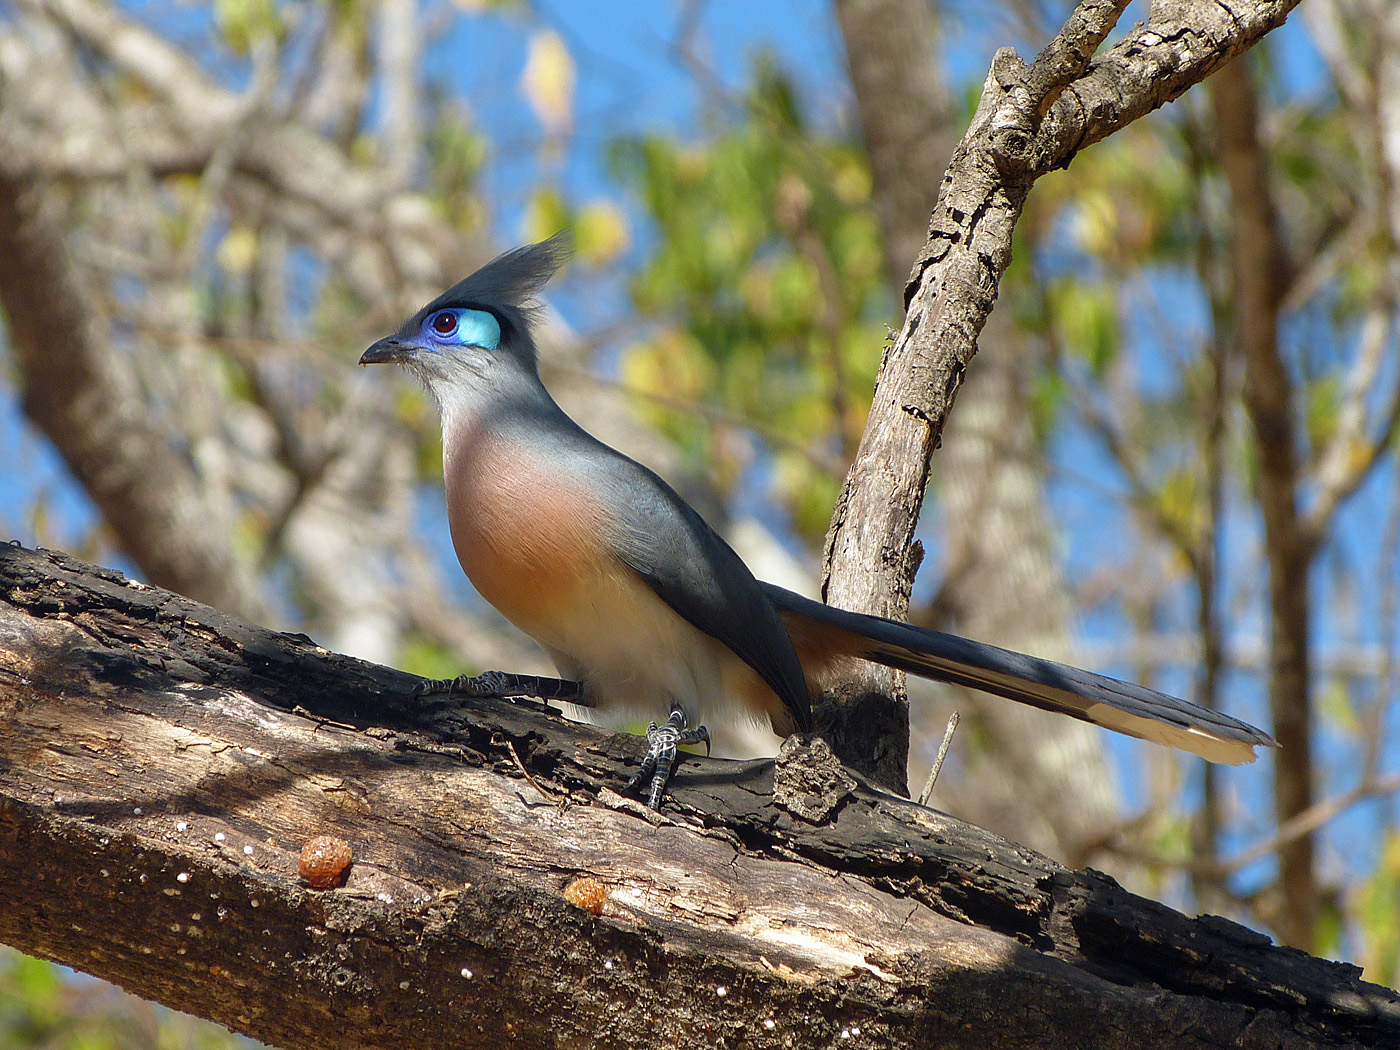 Crested Coua, Kirindy Reserve